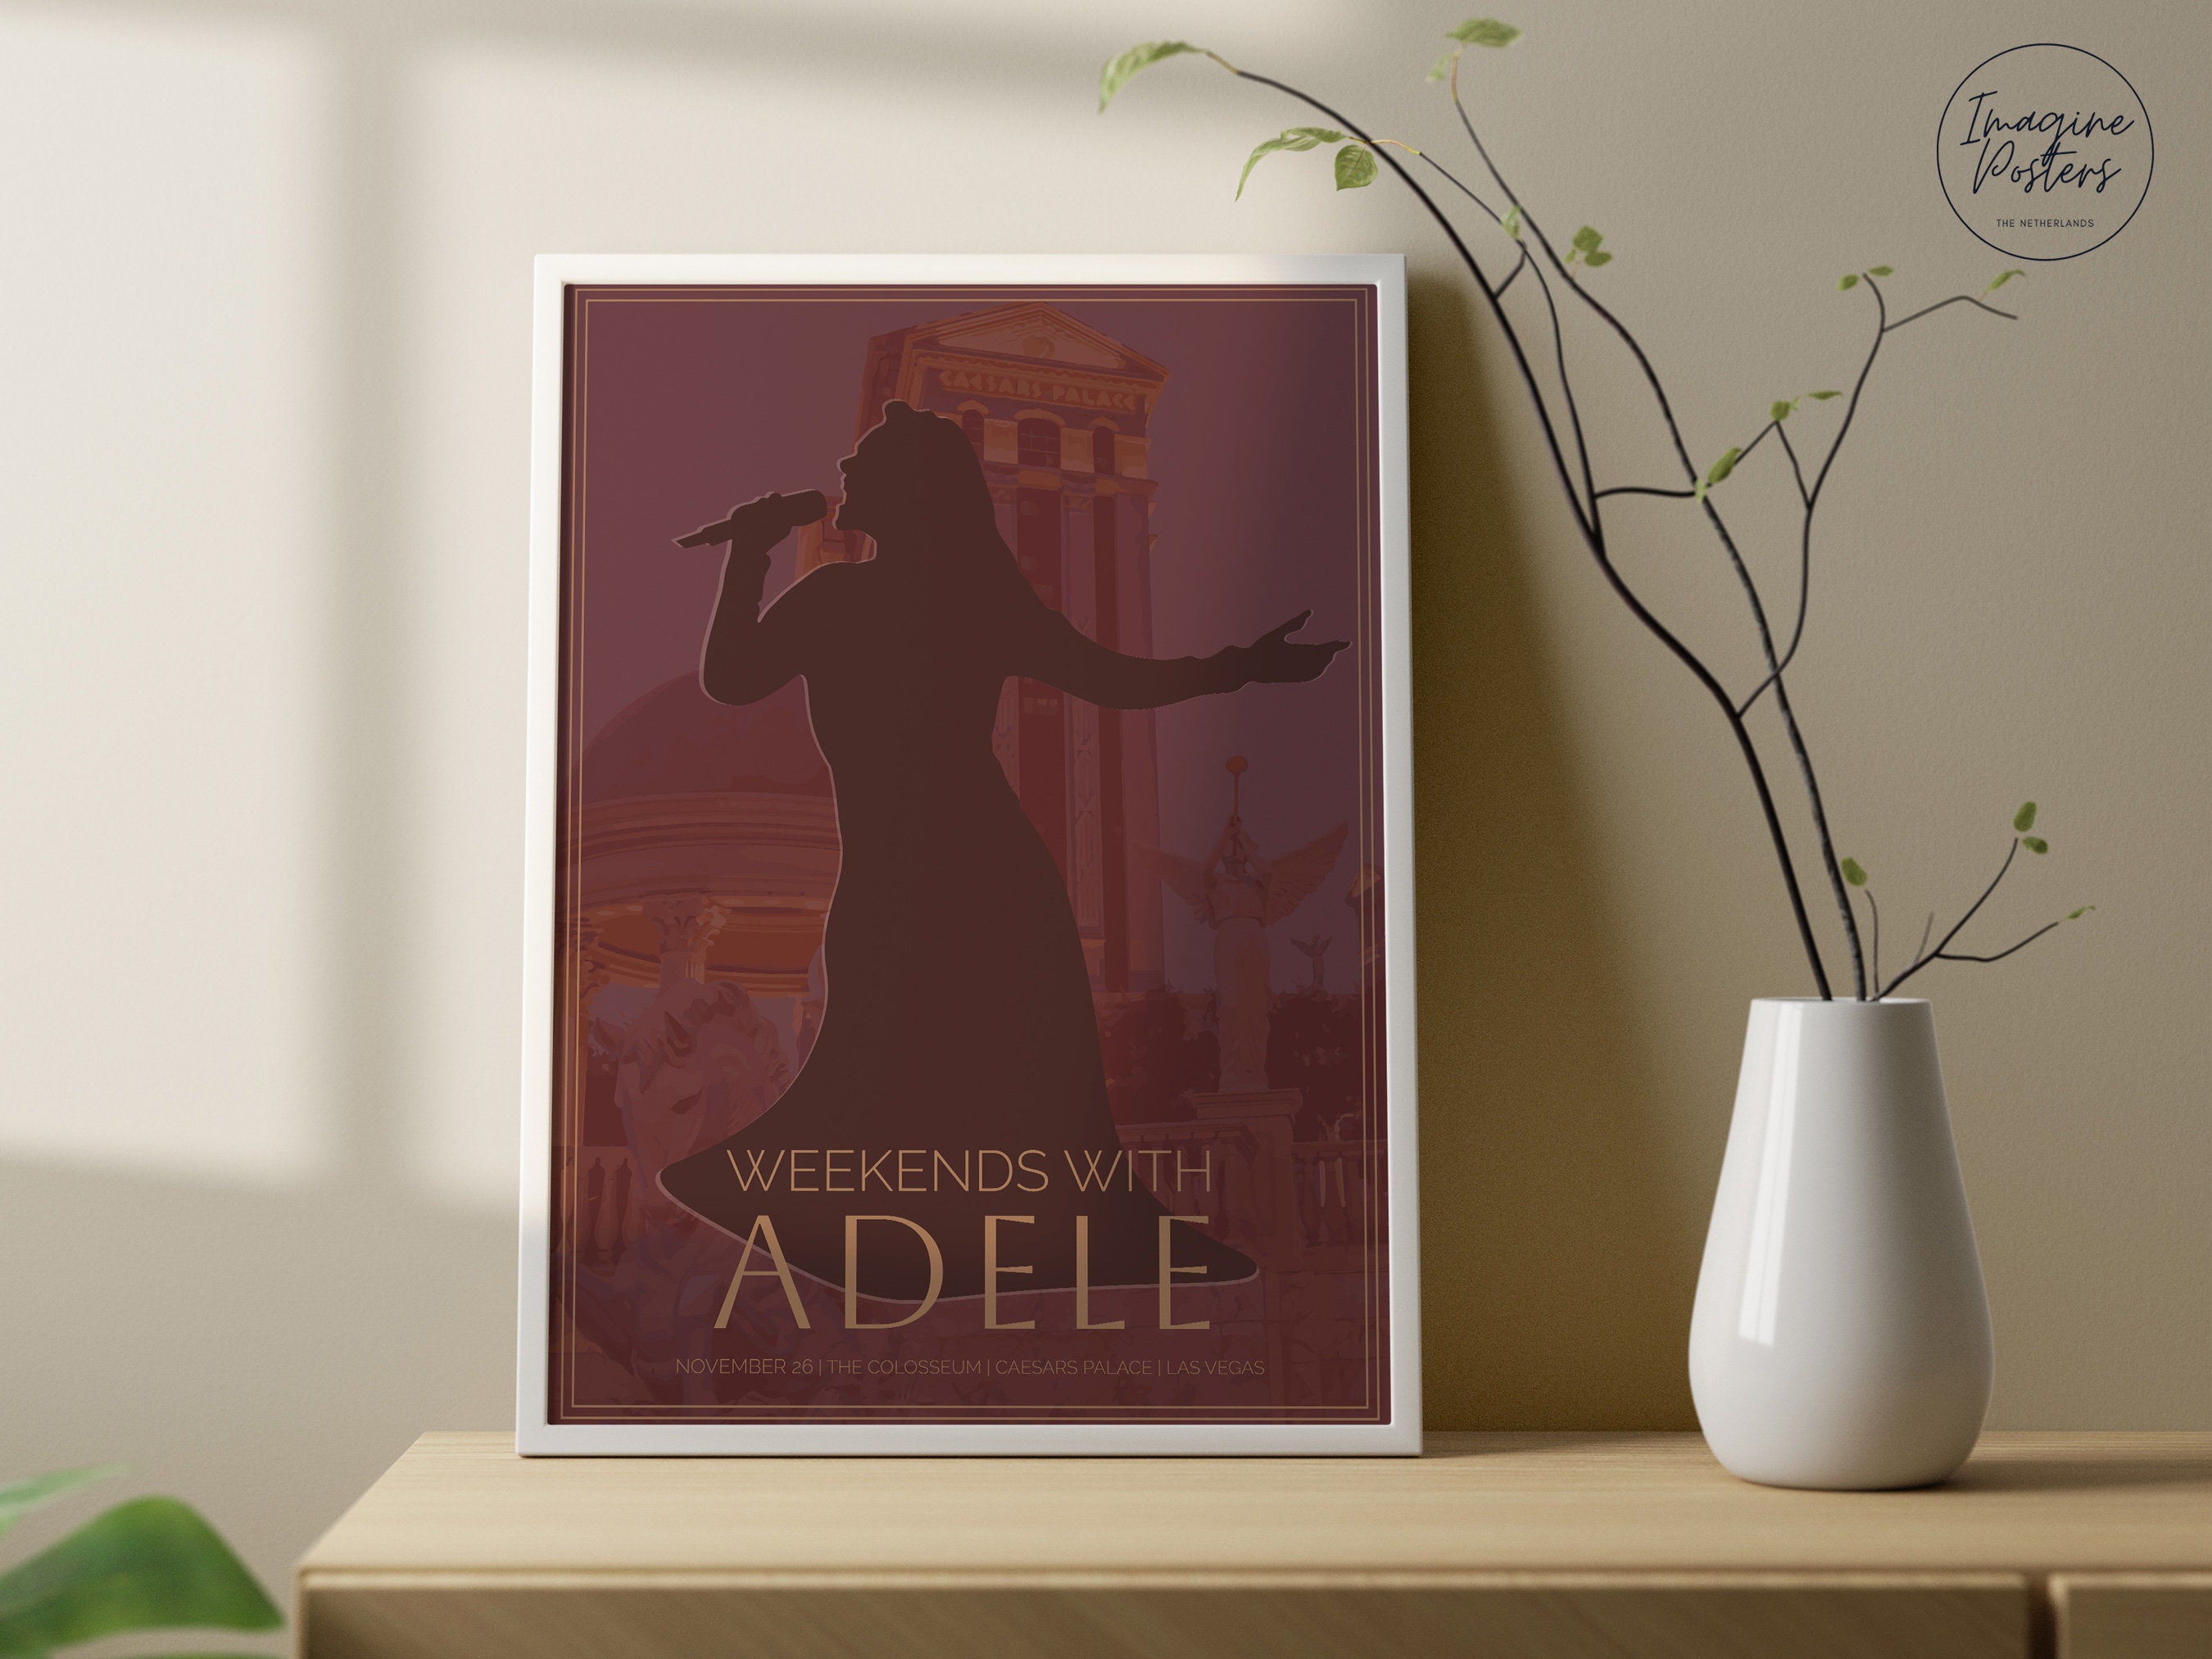 Adele Poster Las Vegas | Weekends with Adele Poster